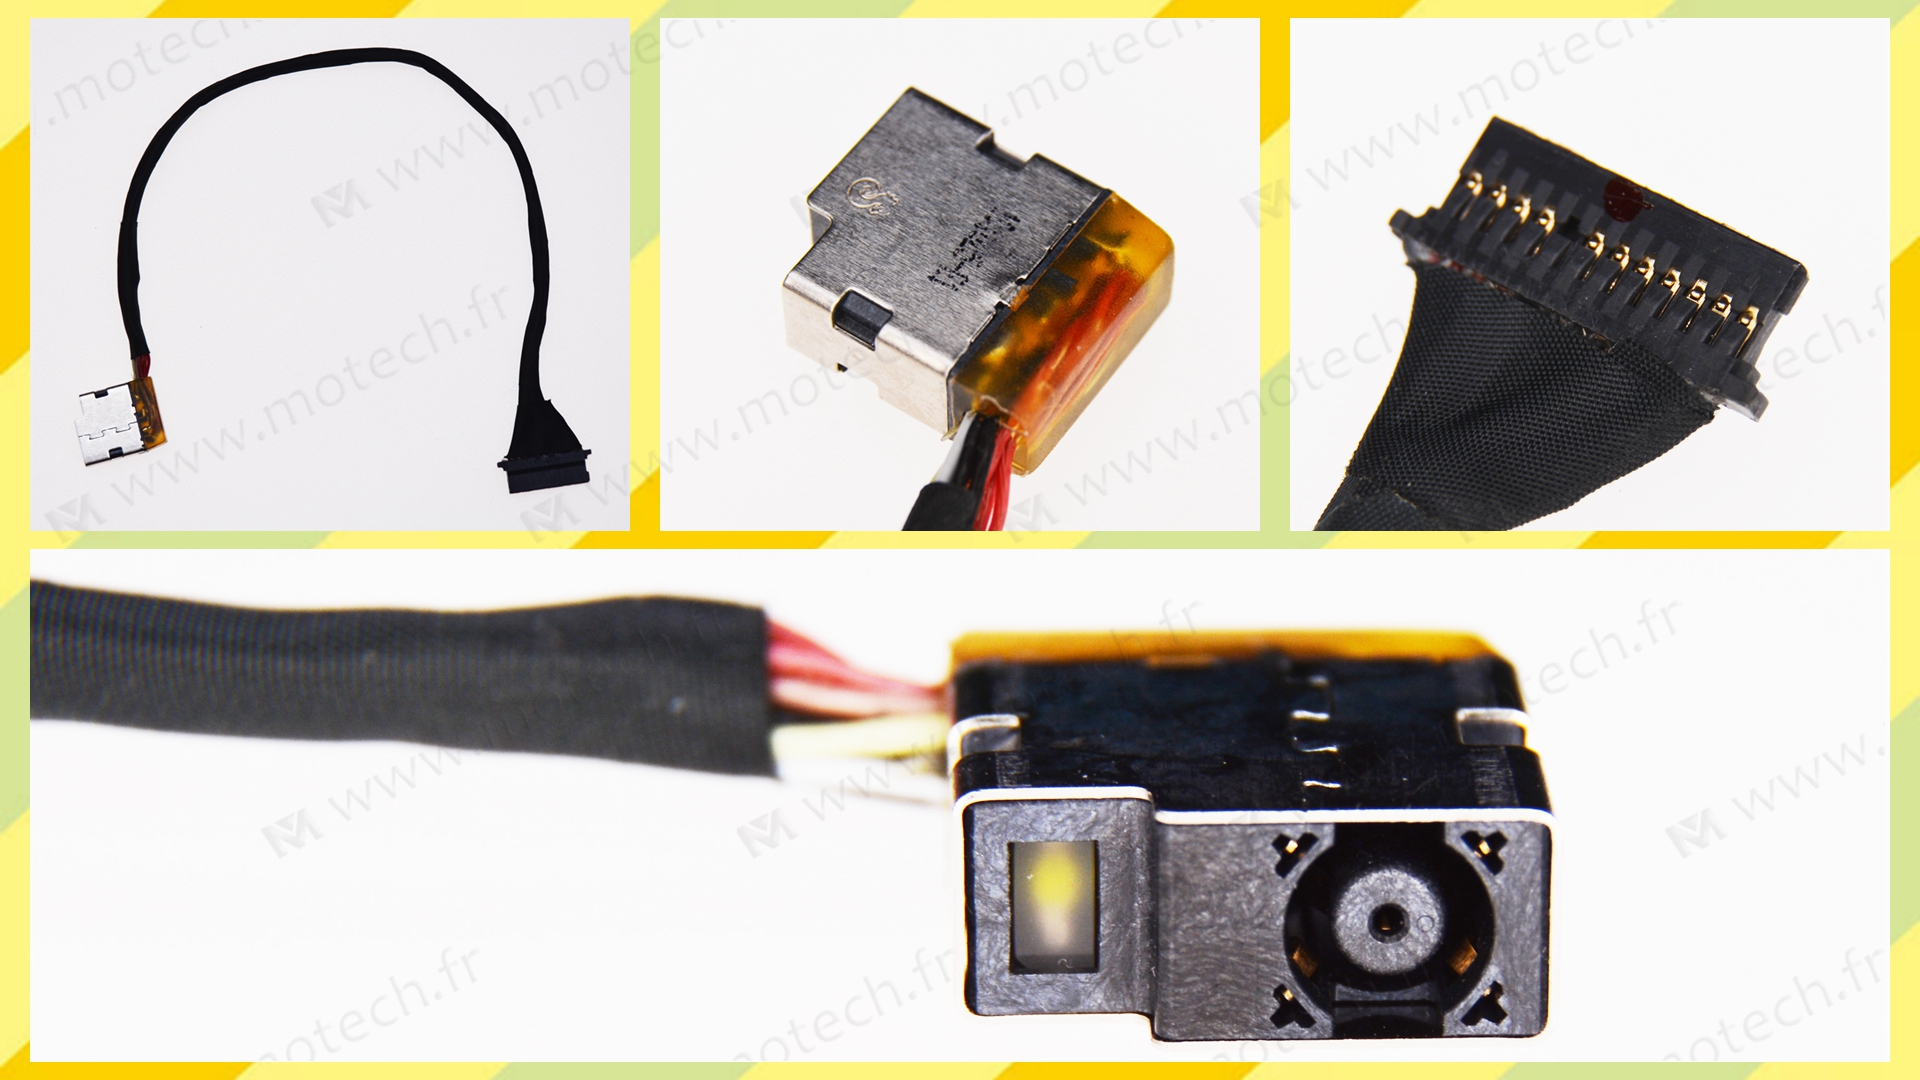 HP 17-an008nf charging connector, HP 17-an008nf DC Power Jack, HP 17-an008nf DC IN Cable, HP 17-an008nf Power Jack, HP 17-an008nf plug, HP 17-an008nf Jack socket, HP 17-an008nf connecteur de charge, 